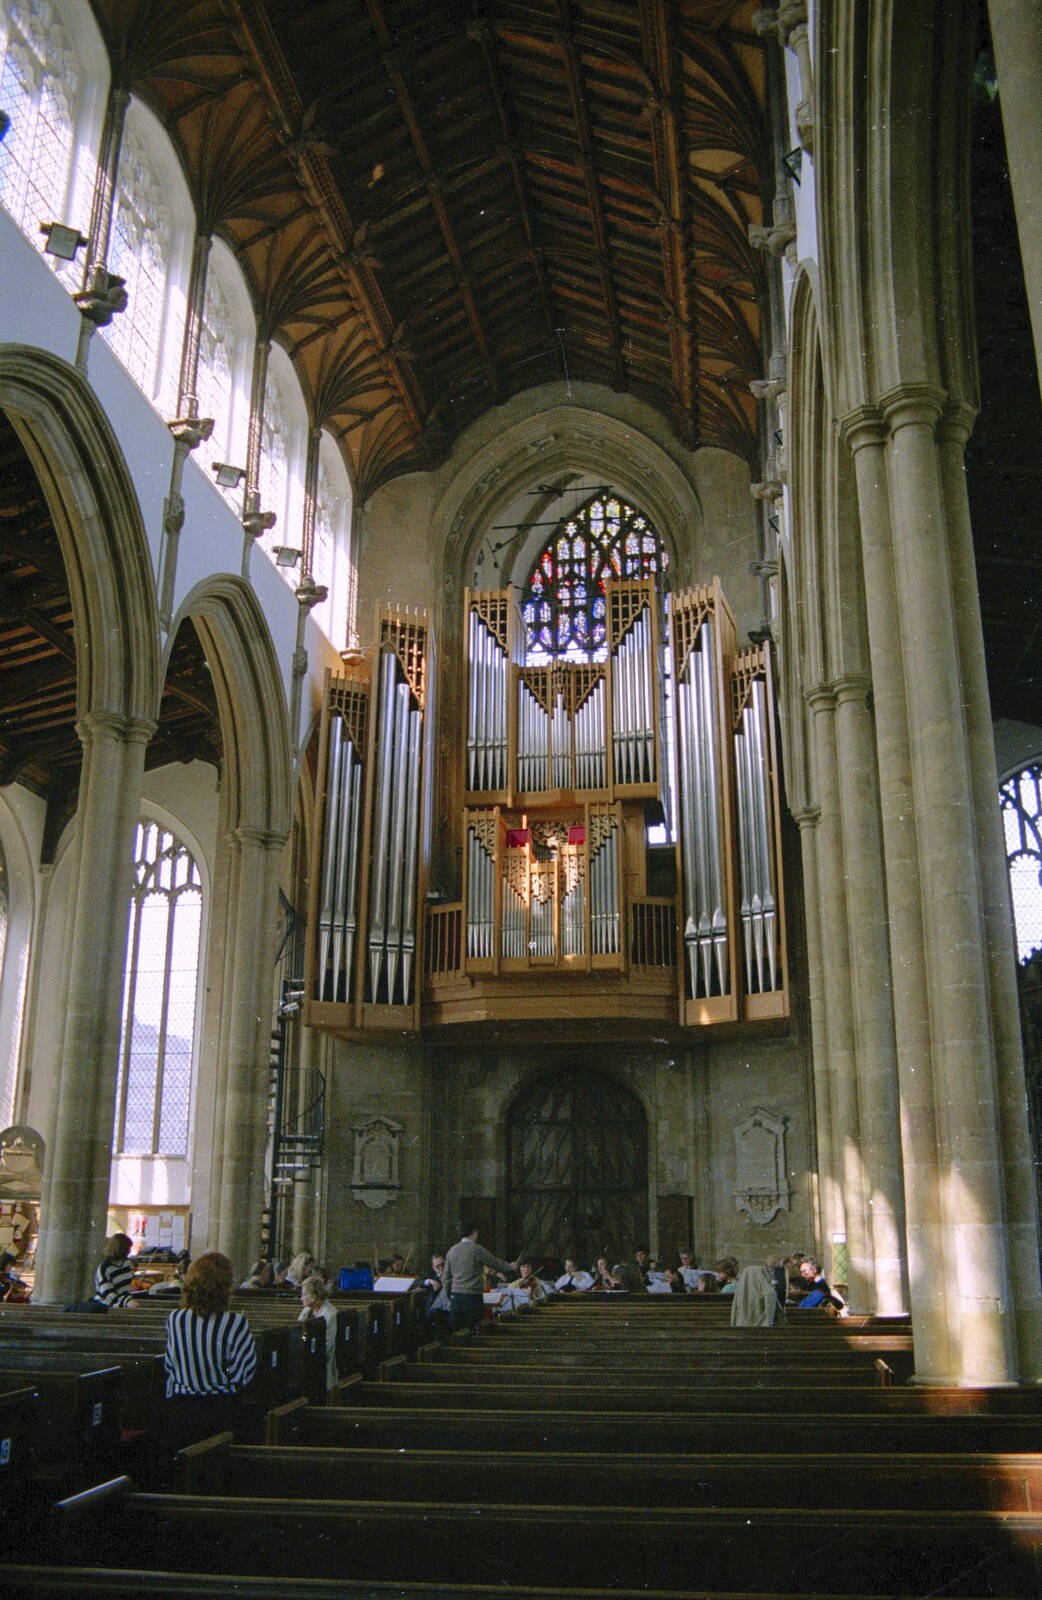 The nave and organ of St. Peter Mancroft from Tapestry With Baz, and a Trip to Blakeney, Suffolk and Norfolk - 14th May 1990